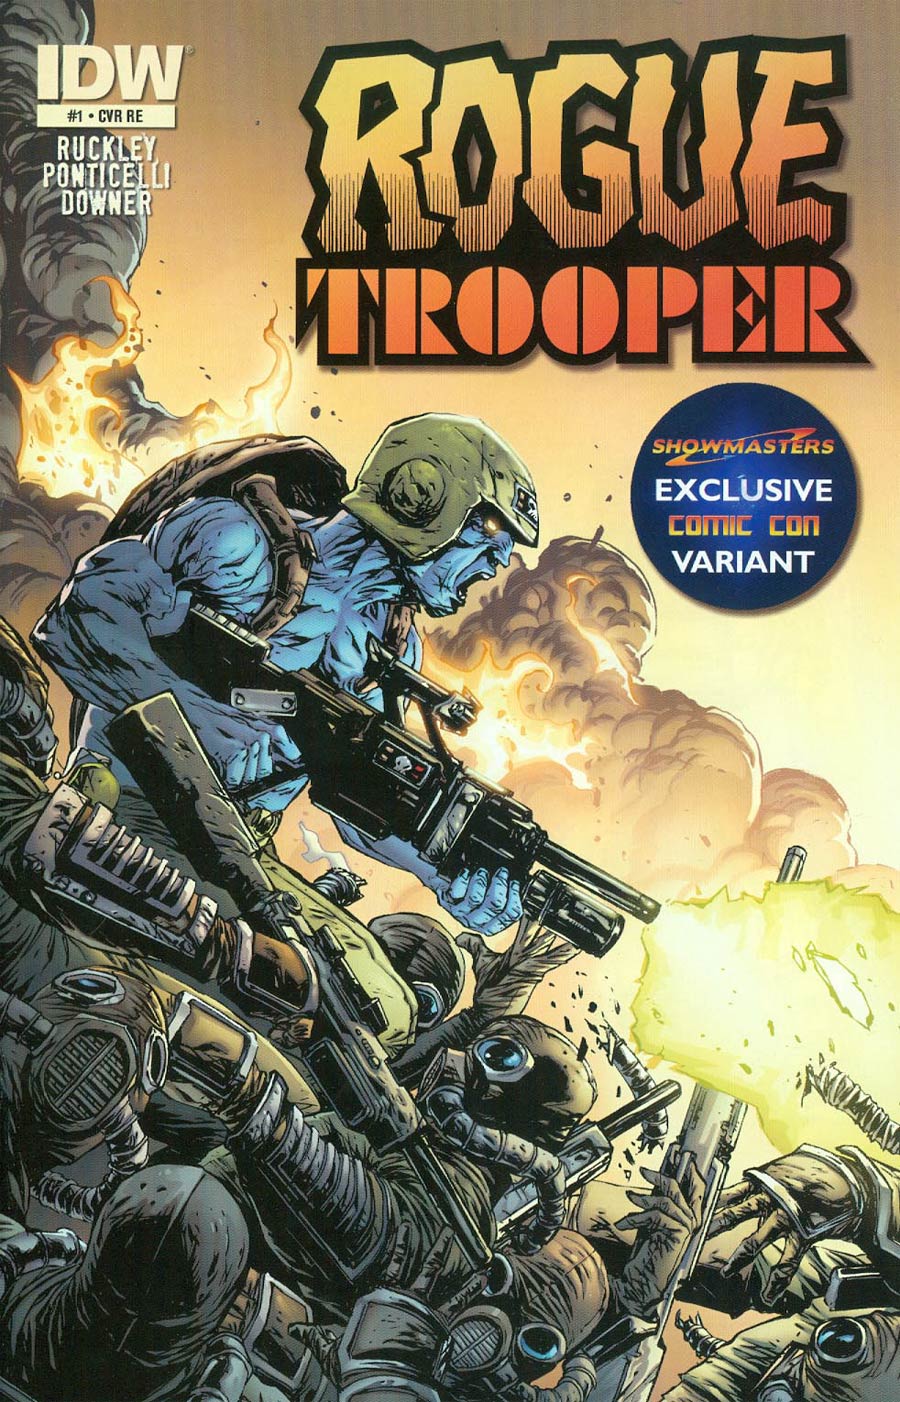 Rogue Trooper Vol 2 #1 Cover D Showmasters Exclusive Comicon Variant Cover